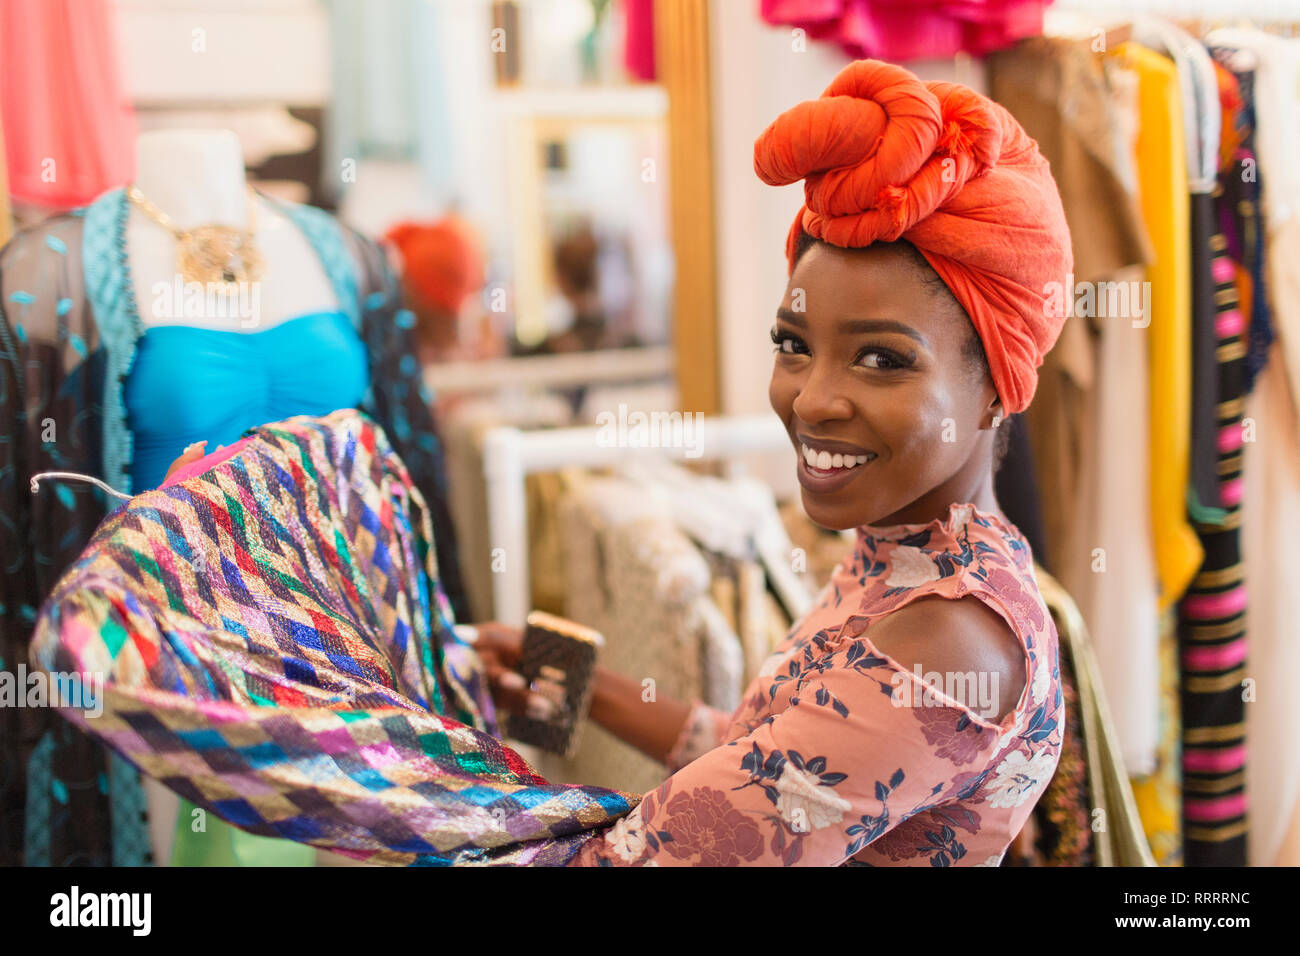 Portrait smiling, confident young woman in headscarf shopping in clothing store Stock Photo